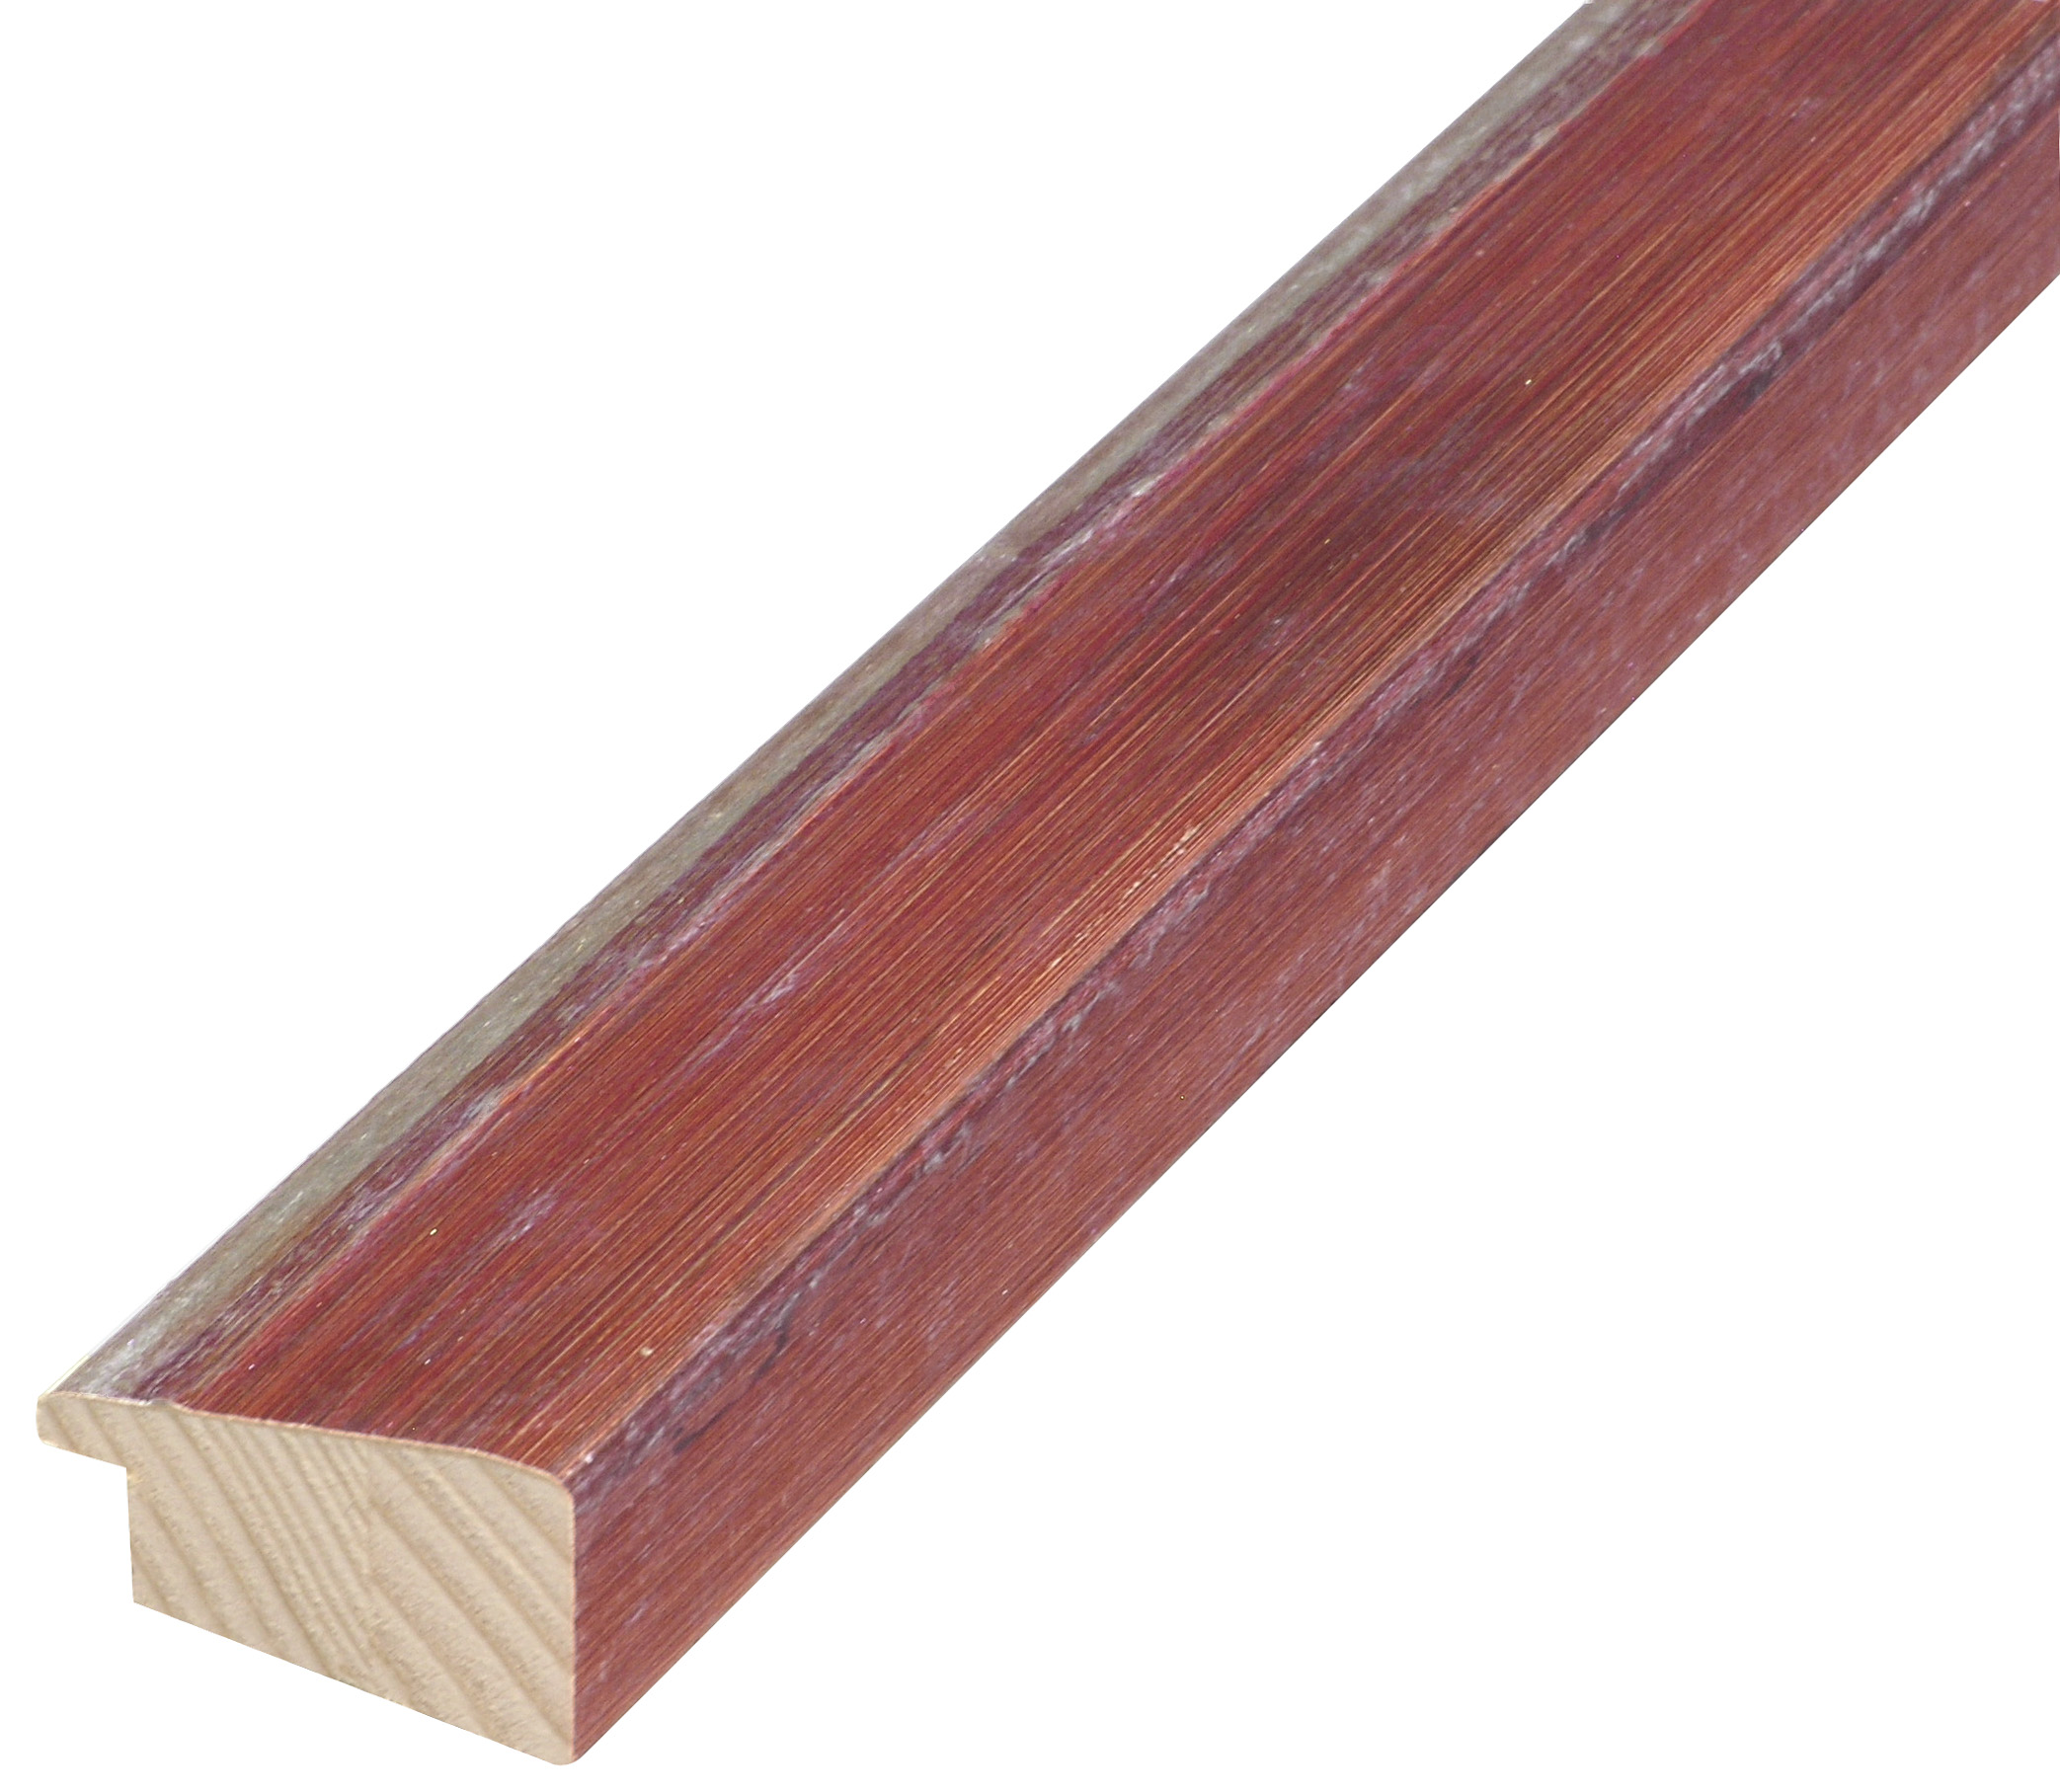 Moulding finger-jointed fir 37mm - distressed red finish, silver edge